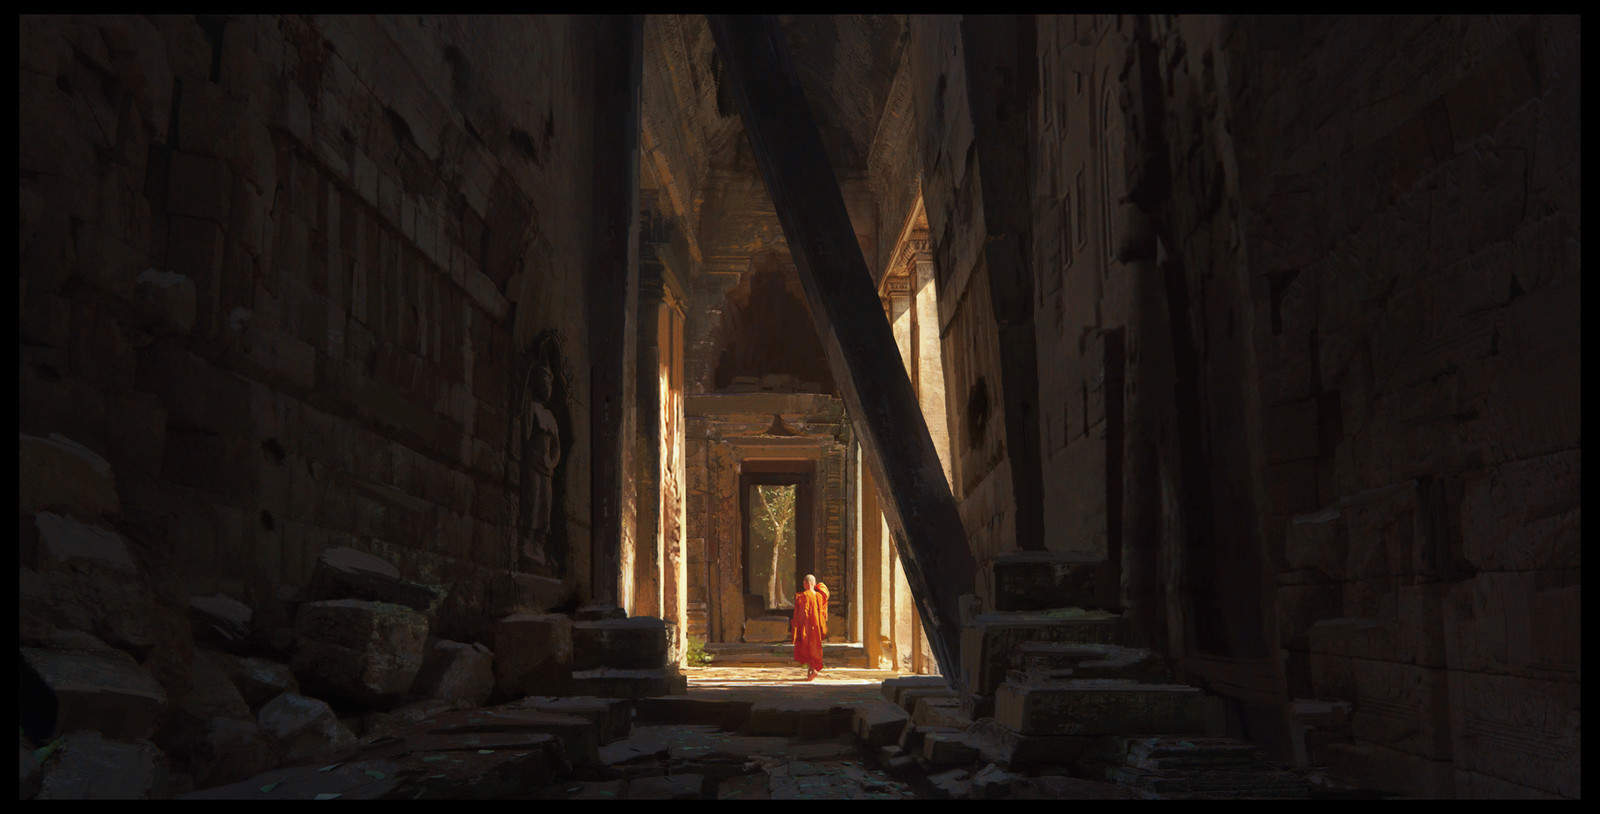 Environment Painting/learn squared